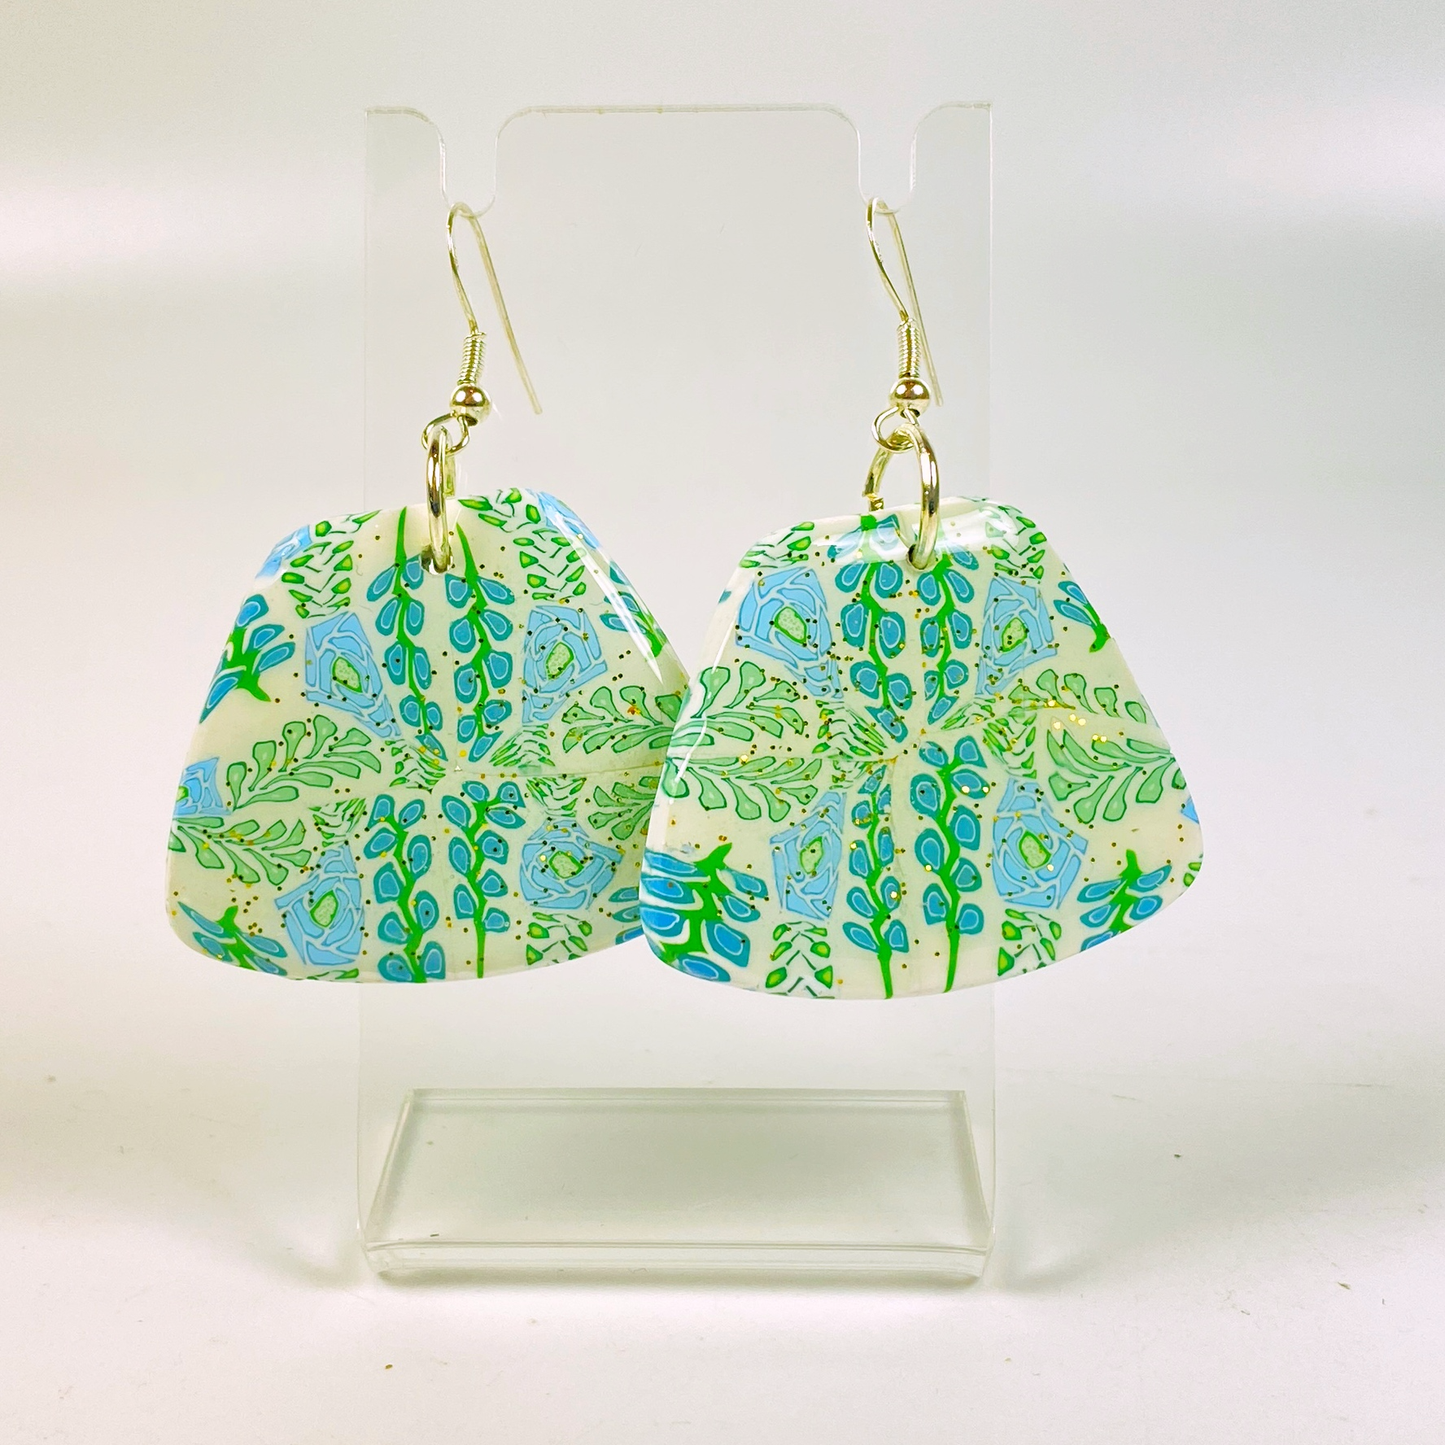 Blue Blossom Handmade Polymer Clay Trapezoid Earrings on a clear acrylic earring stand